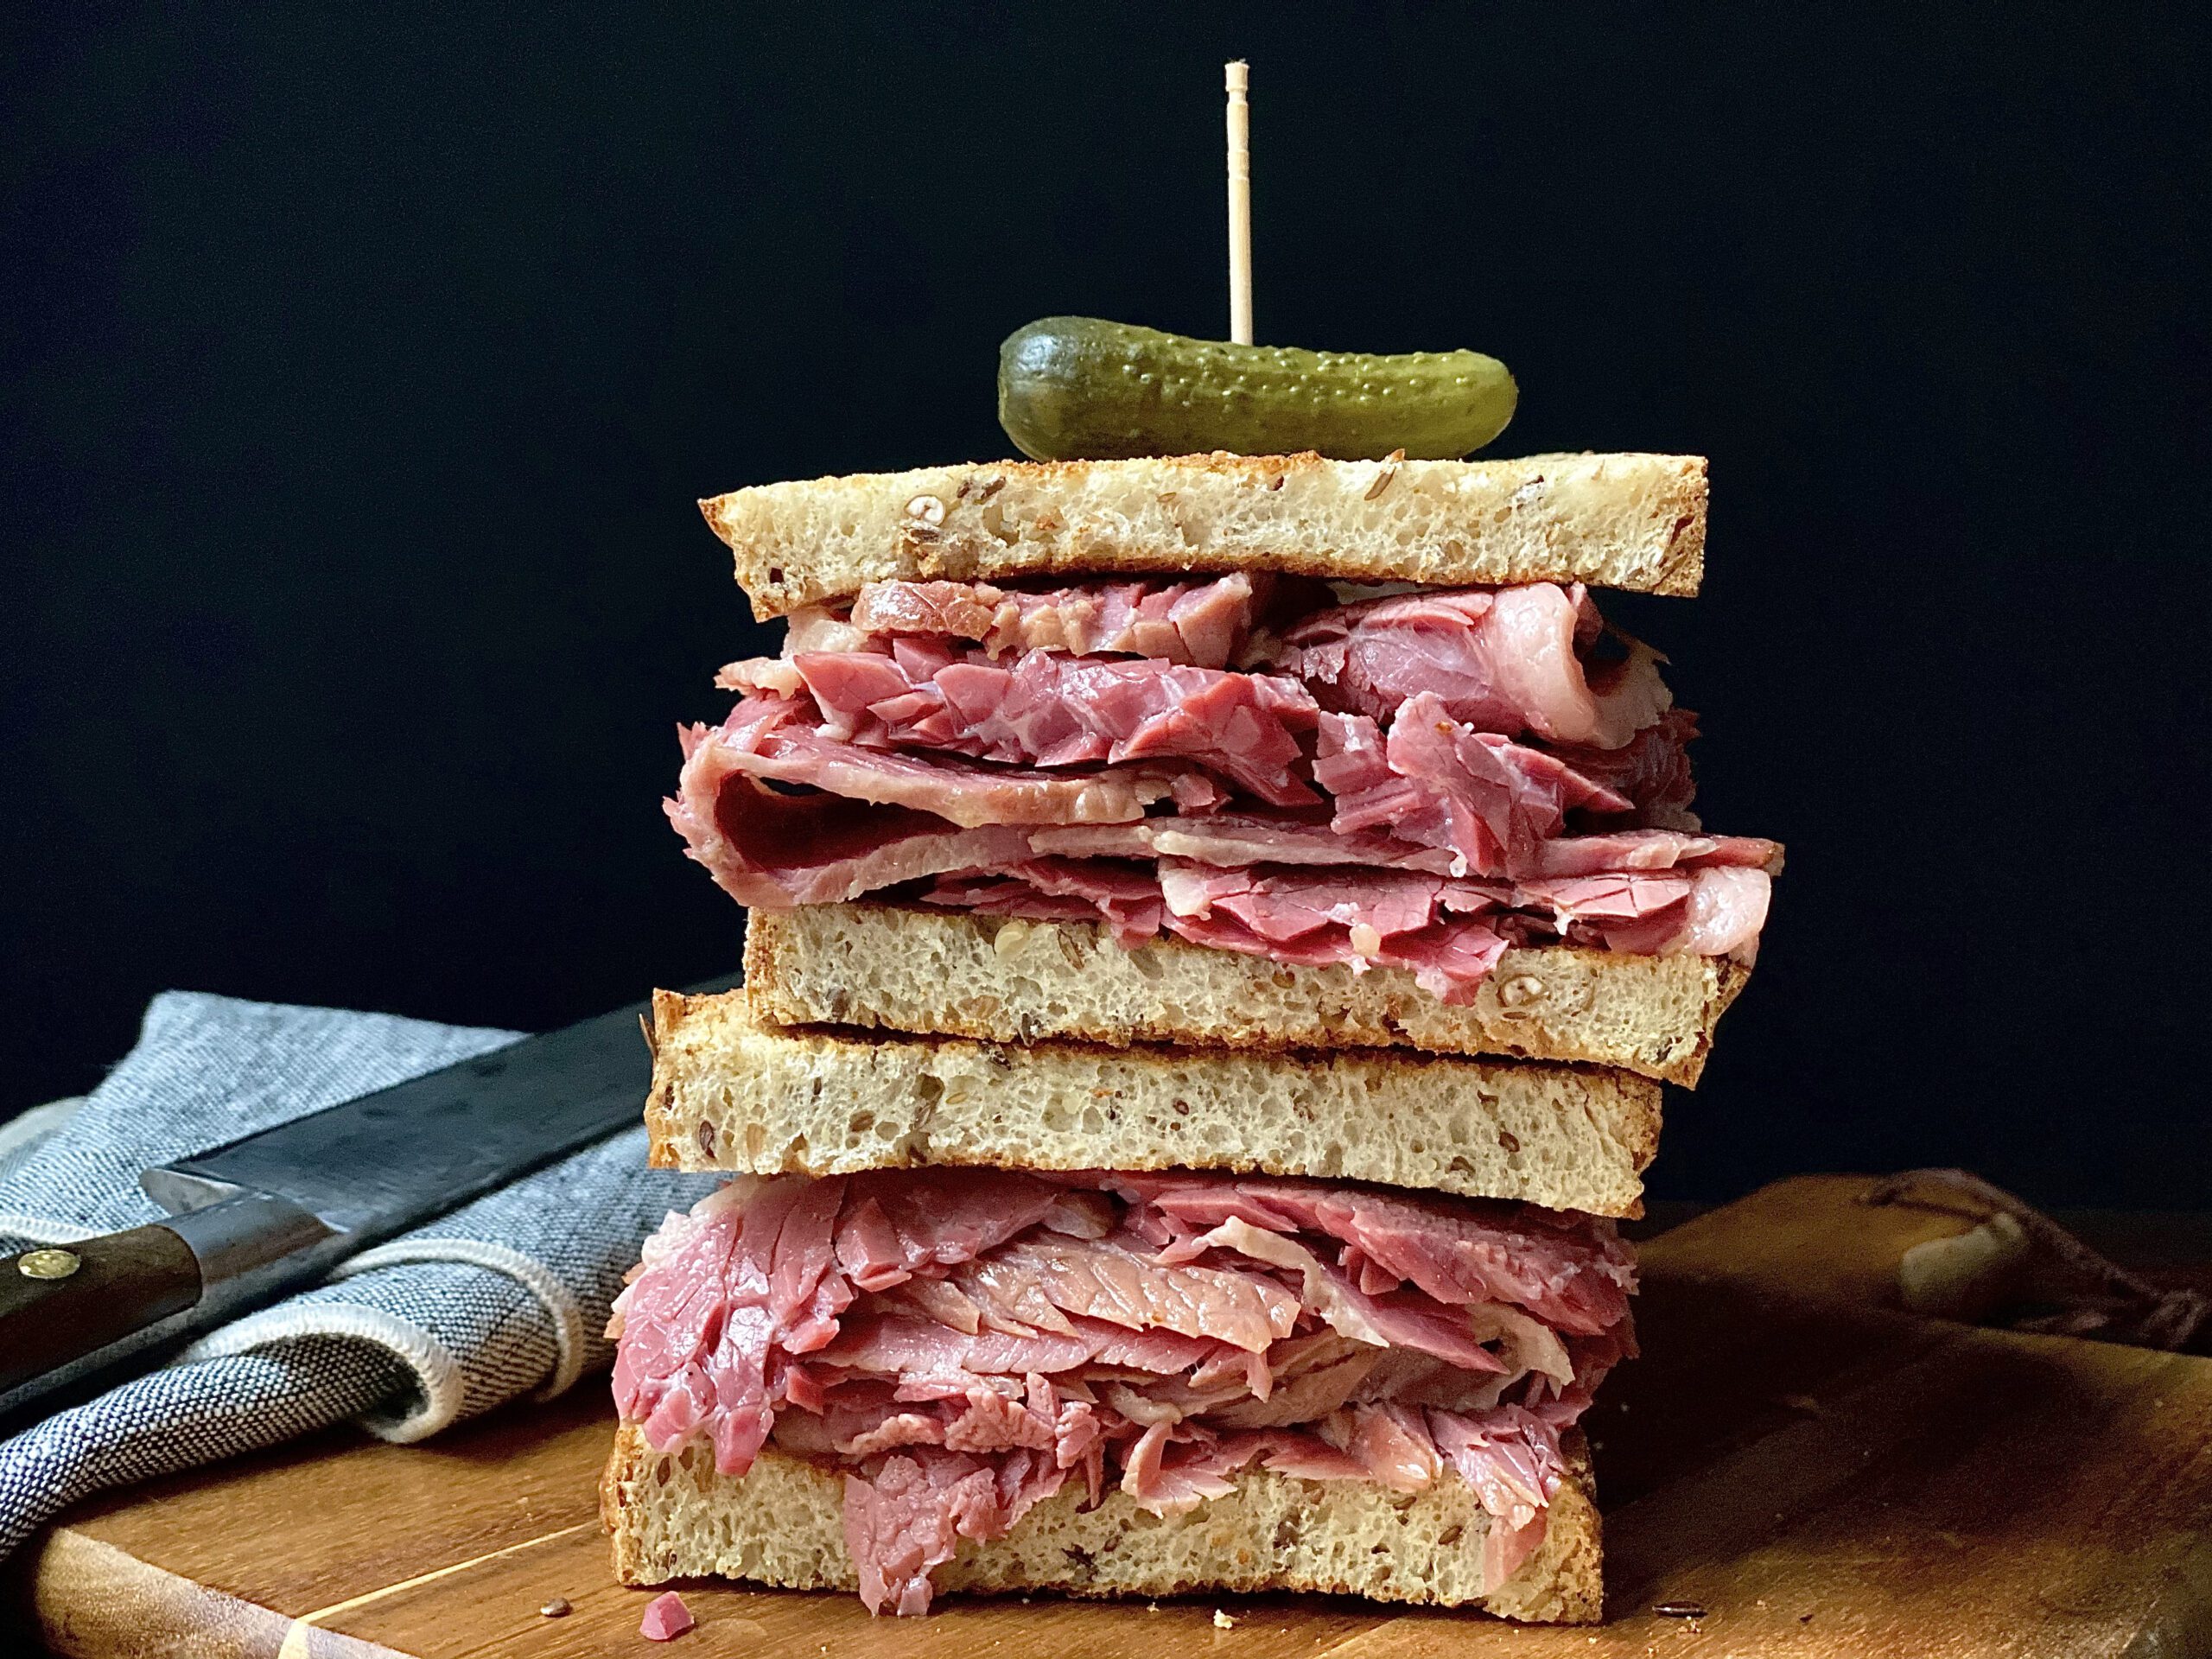 Tender and juicy, slow cooker corned beef served on toasted rye bread with a pickle on top